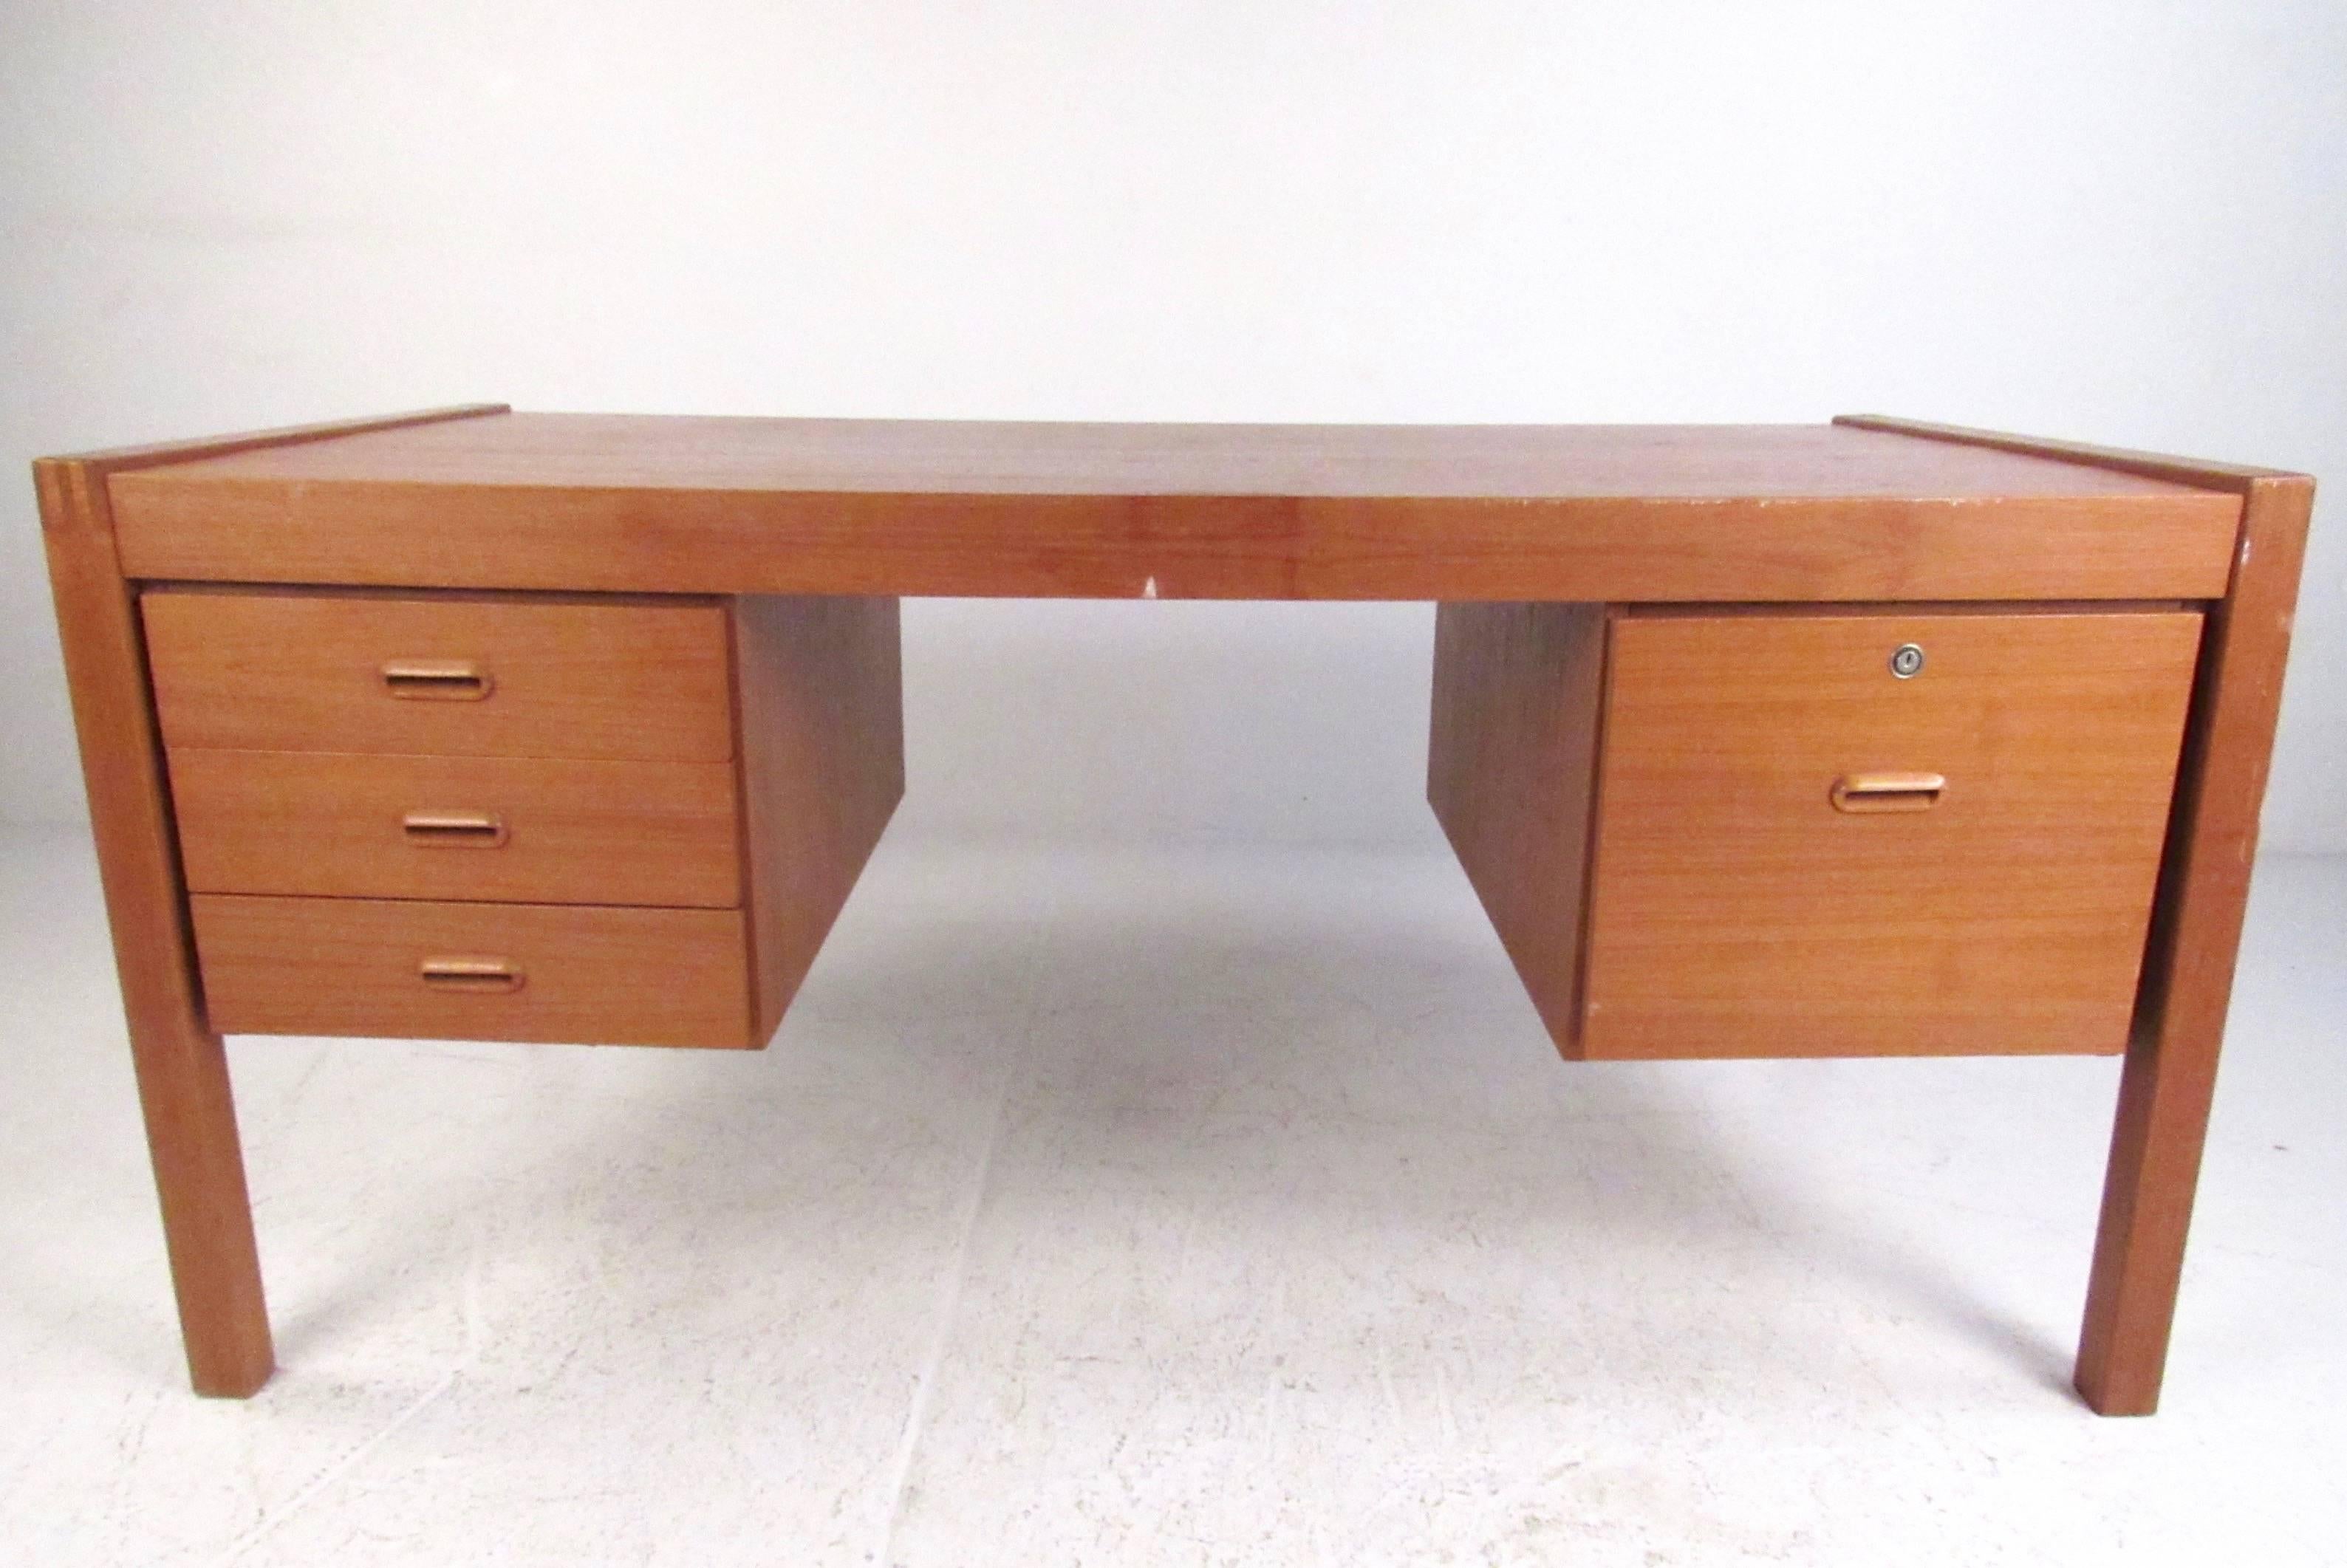 This stylish Scandinavian Modern desk features broad Danish design and teak finish. Dovetail details and carved drawer pulls add to the spacious storage offered within its four drawers. Please confirm item location (NY or NJ).